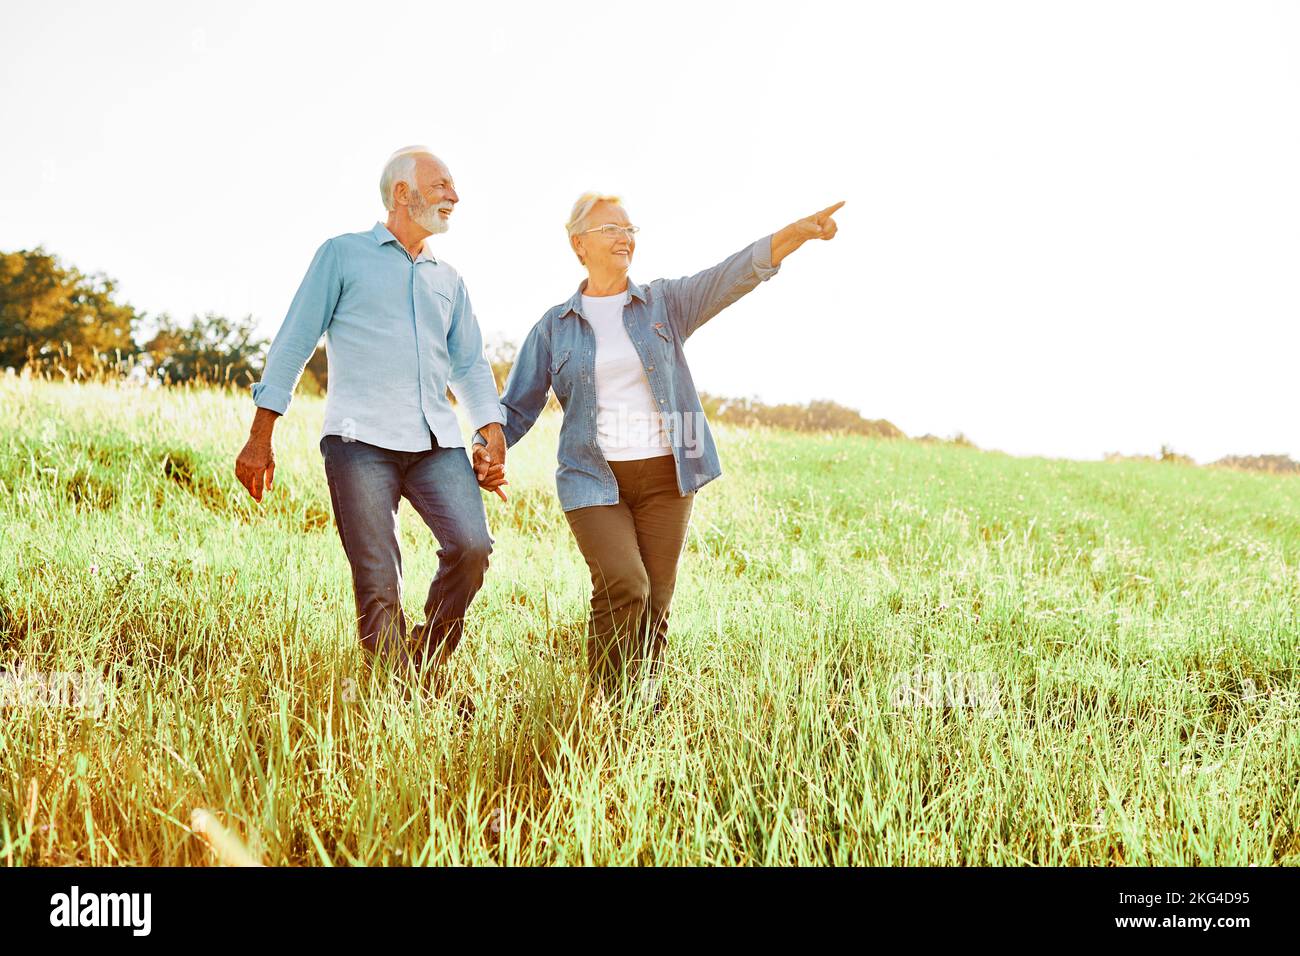 woman man outdoor senior couple happy lifestyle retirement together smiling love old nature mature Stock Photo